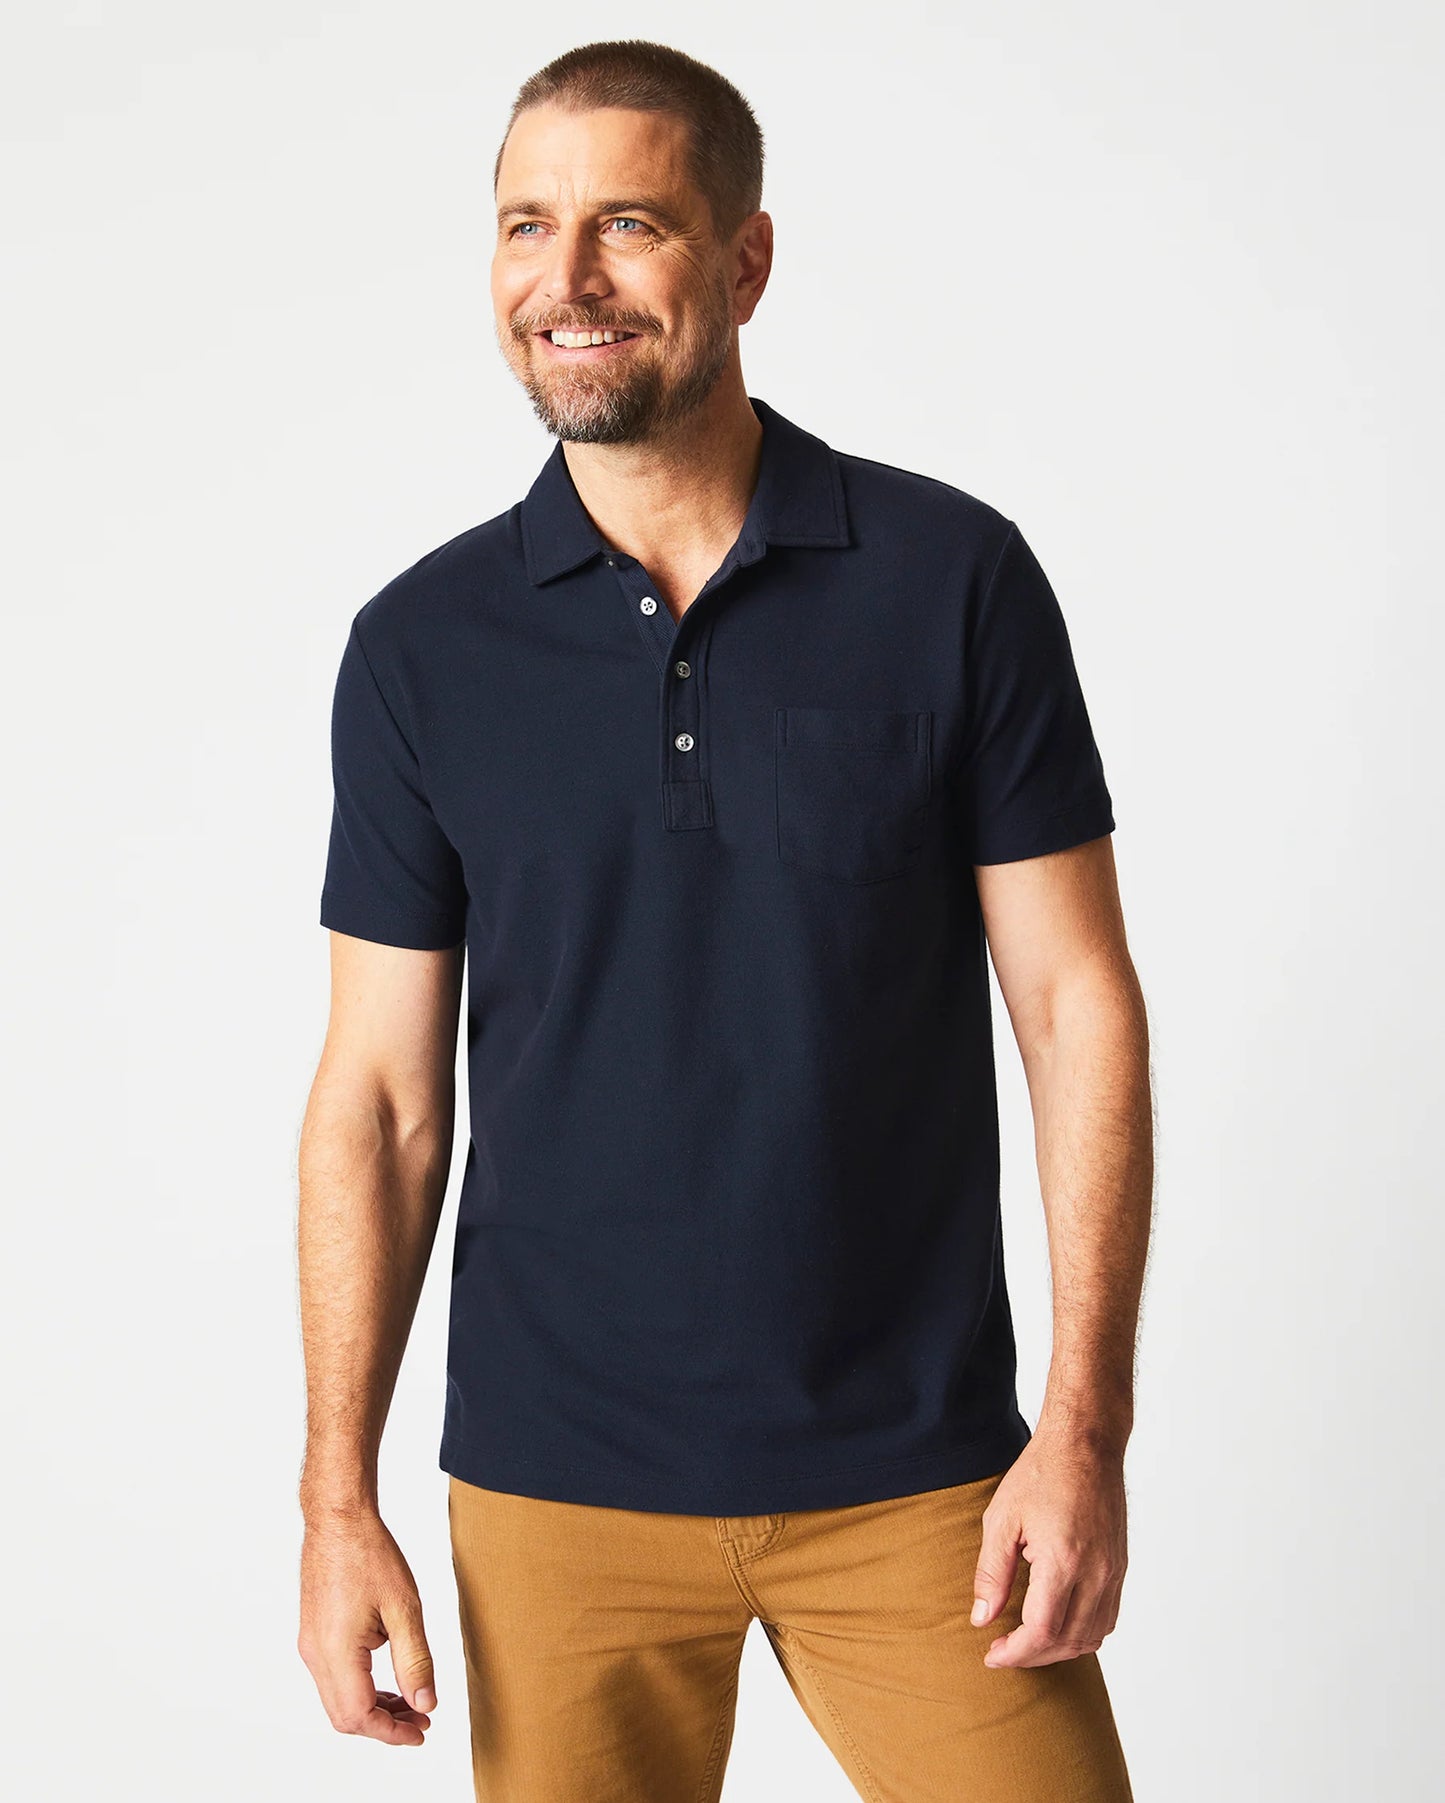 Load image into Gallery viewer, Front view of man wearing a dark blue short sleeve polo shirt by Billy Reid
